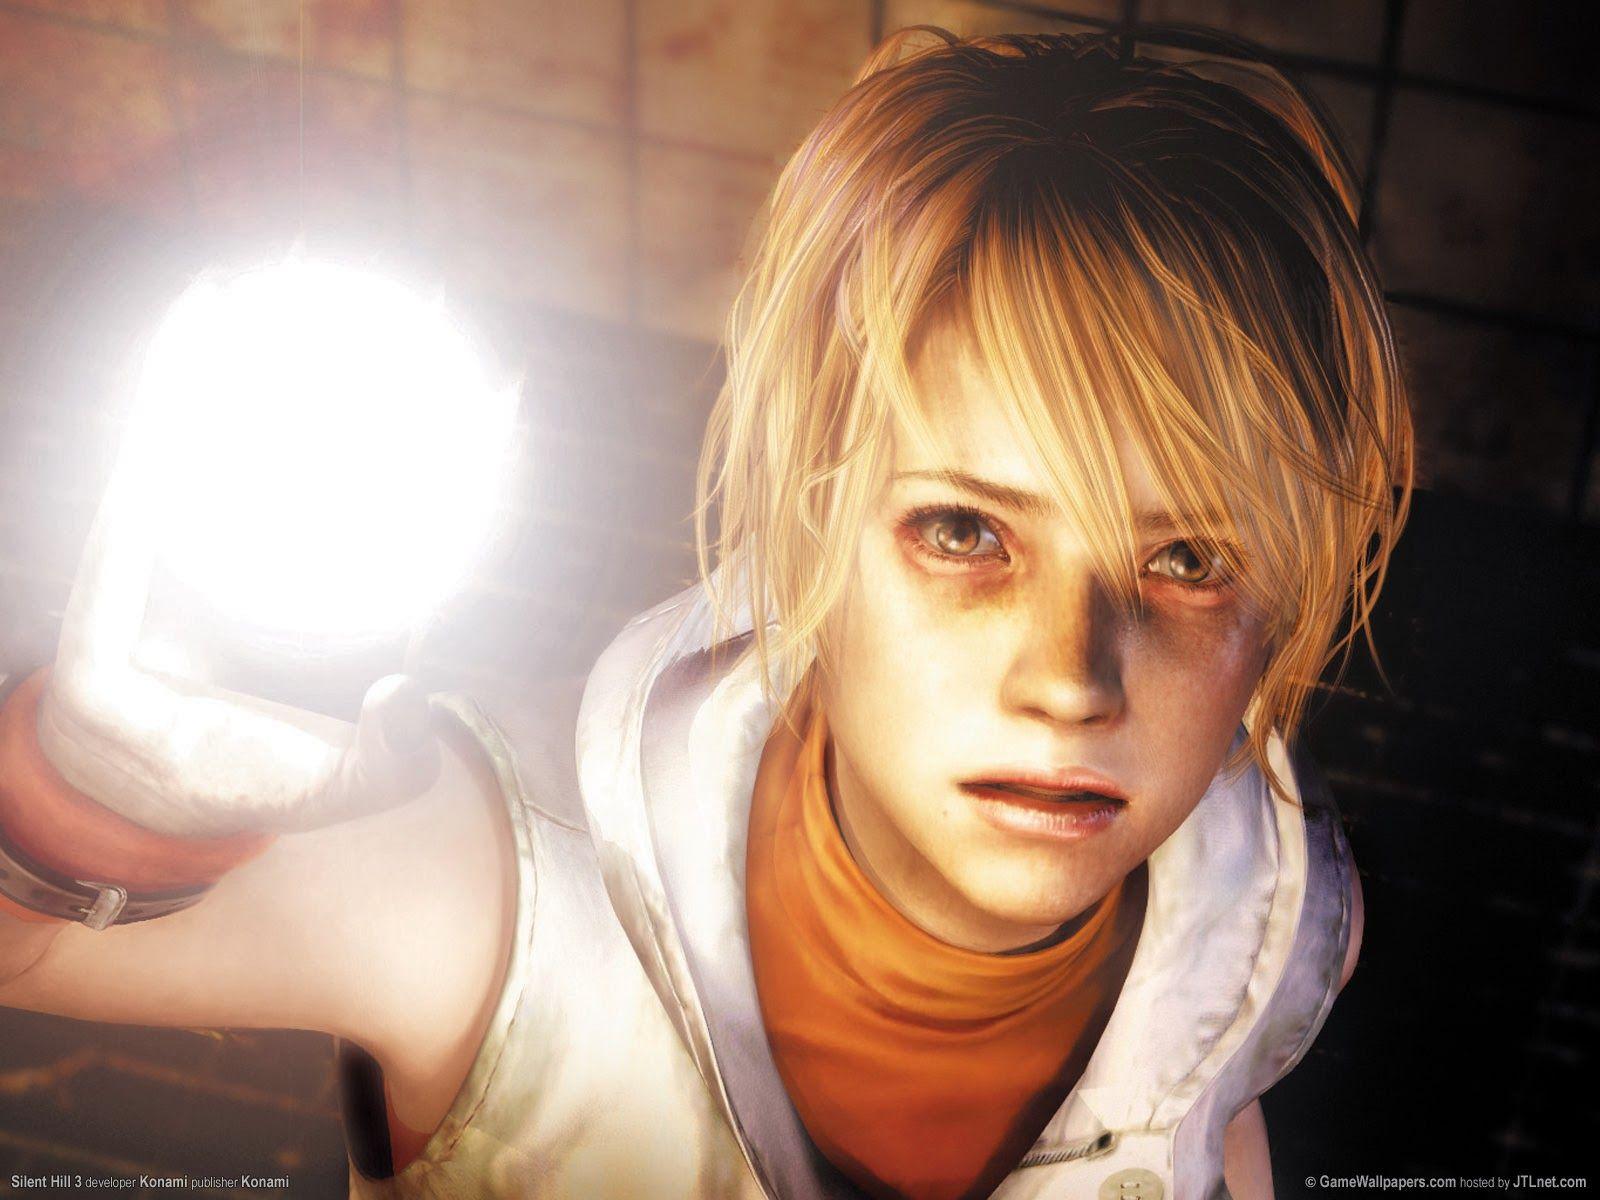 top female protagonists in video games - Heather Mason (Silent Hill III)